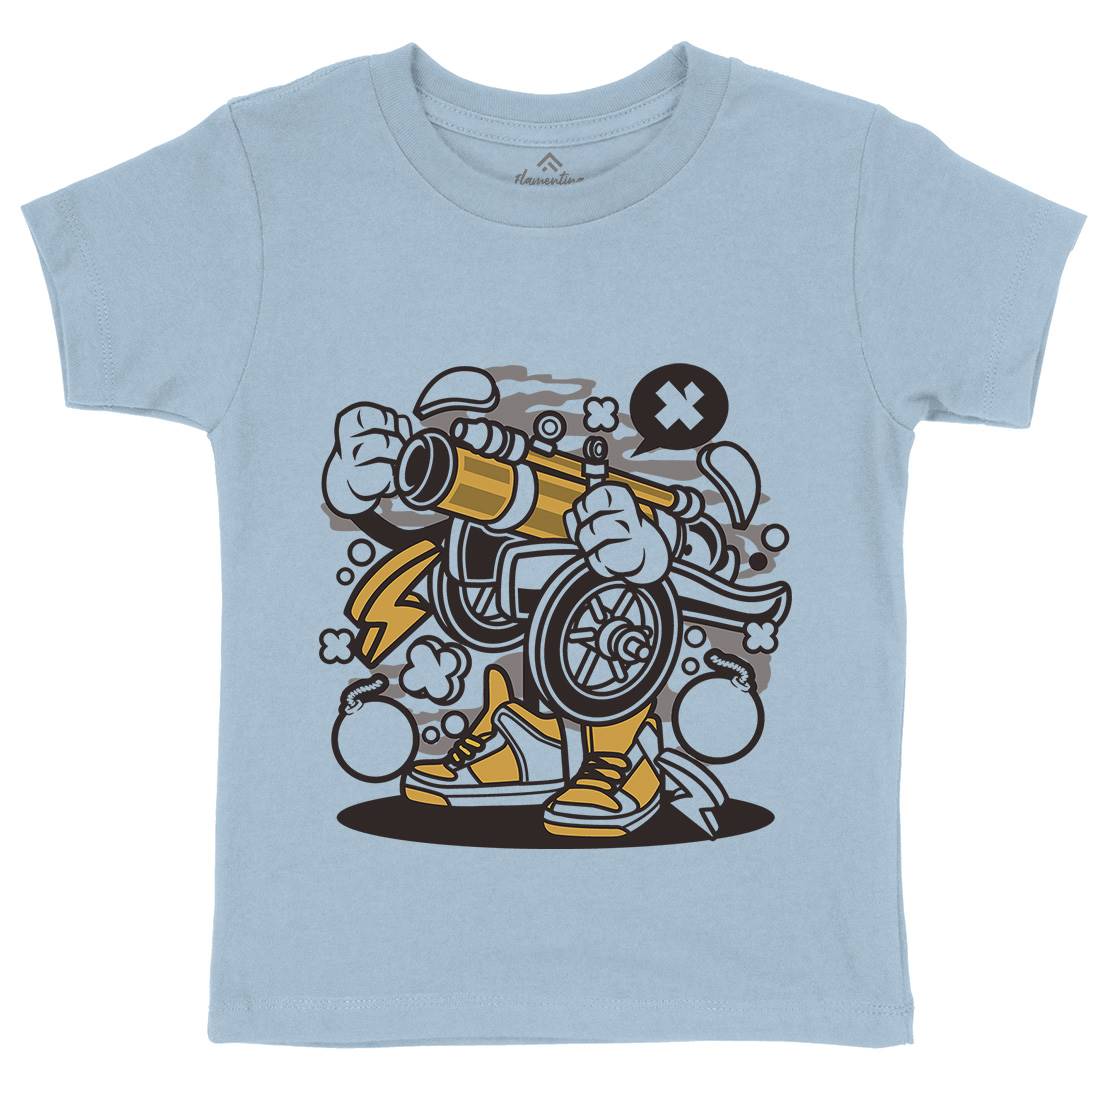 Cannonball Kids Crew Neck T-Shirt Army C043